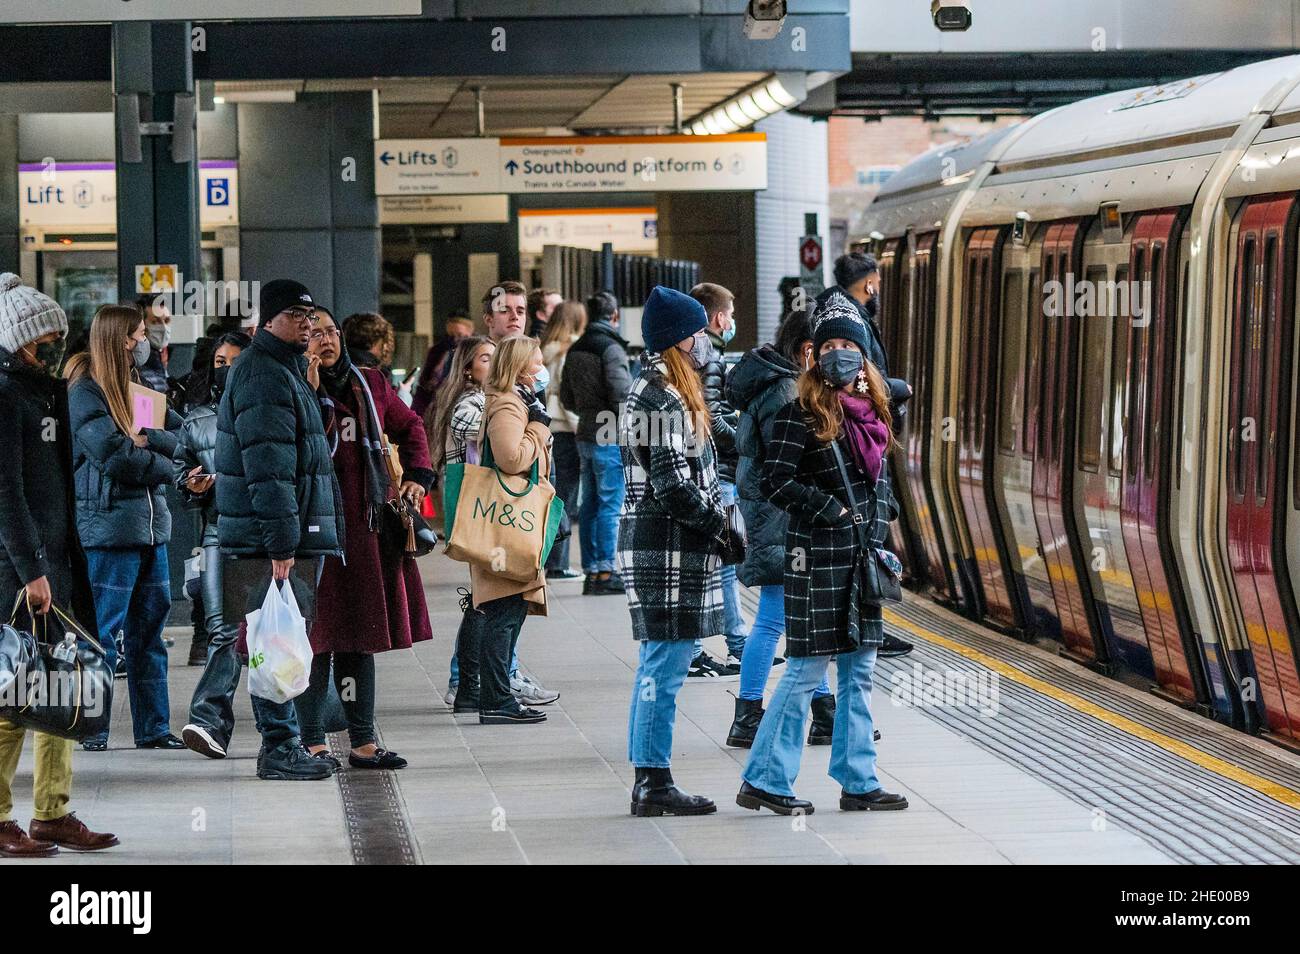 London, UK. 7th Jan, 2022. Most trains seem reasonably b usy (for a lunchtime), depite the latest stay at home advice - Masks are again compulsory on public transport, due to the Omicron variant, and there is an increase in compliance but plenty continue to ignore the rule. Credit: Guy Bell/Alamy Live News Stock Photo